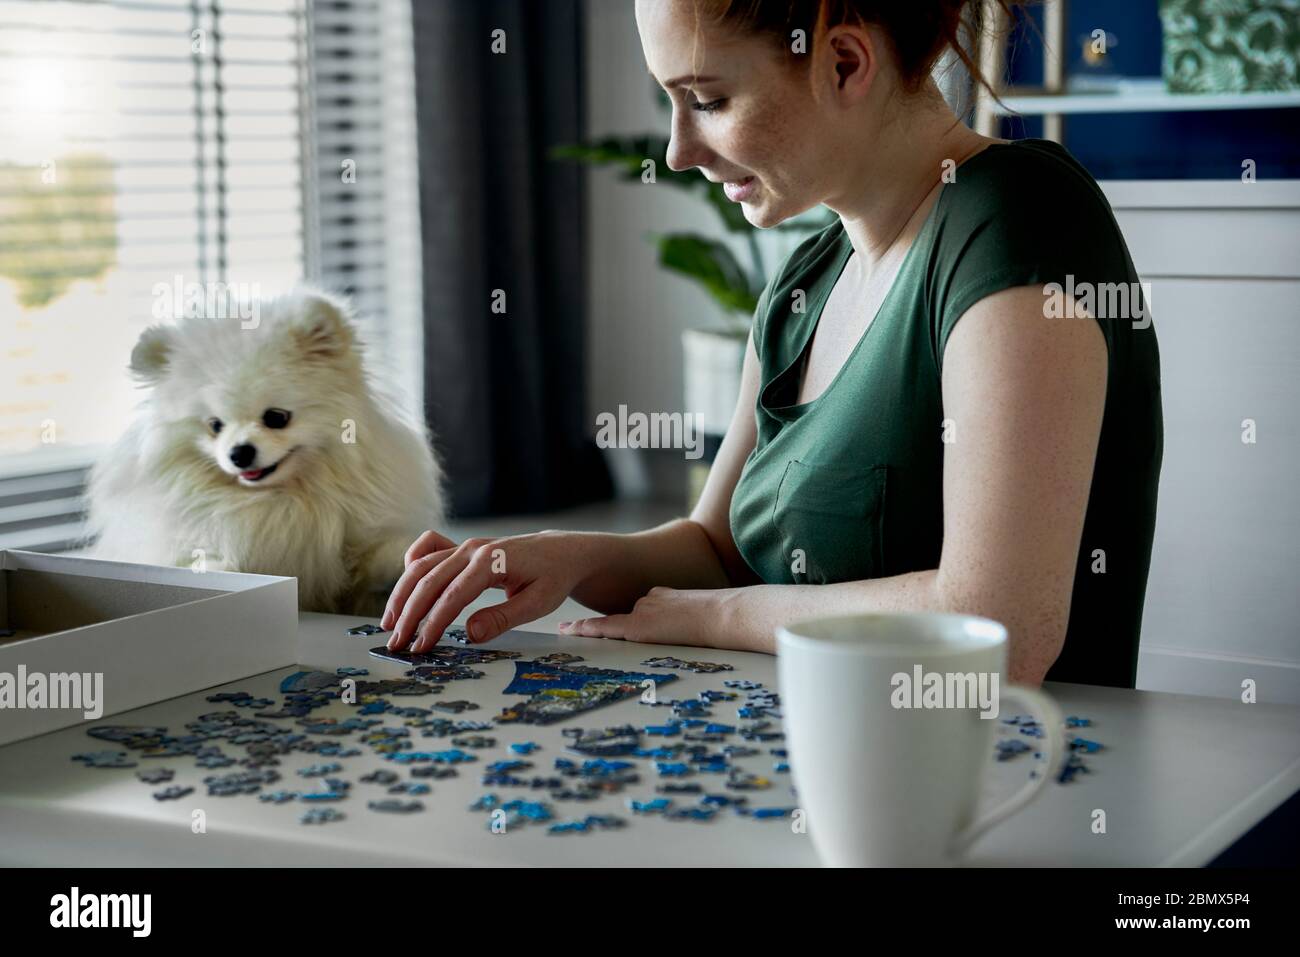 Young woman doing jigsaw puzzles Stock Photo